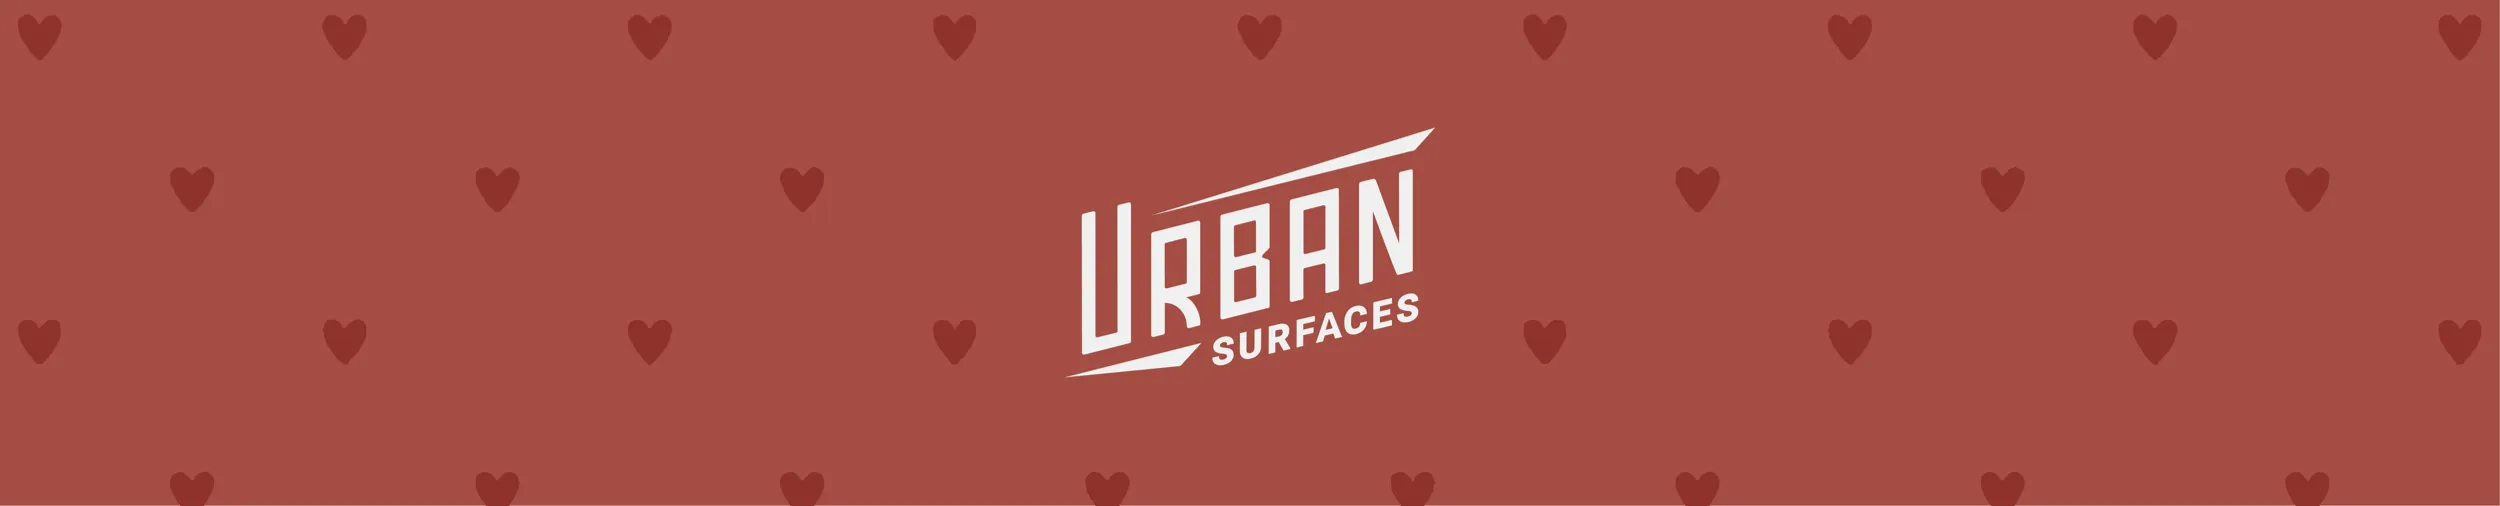 Urban Surfaces logo on red background with hearts for Valentine's Day.